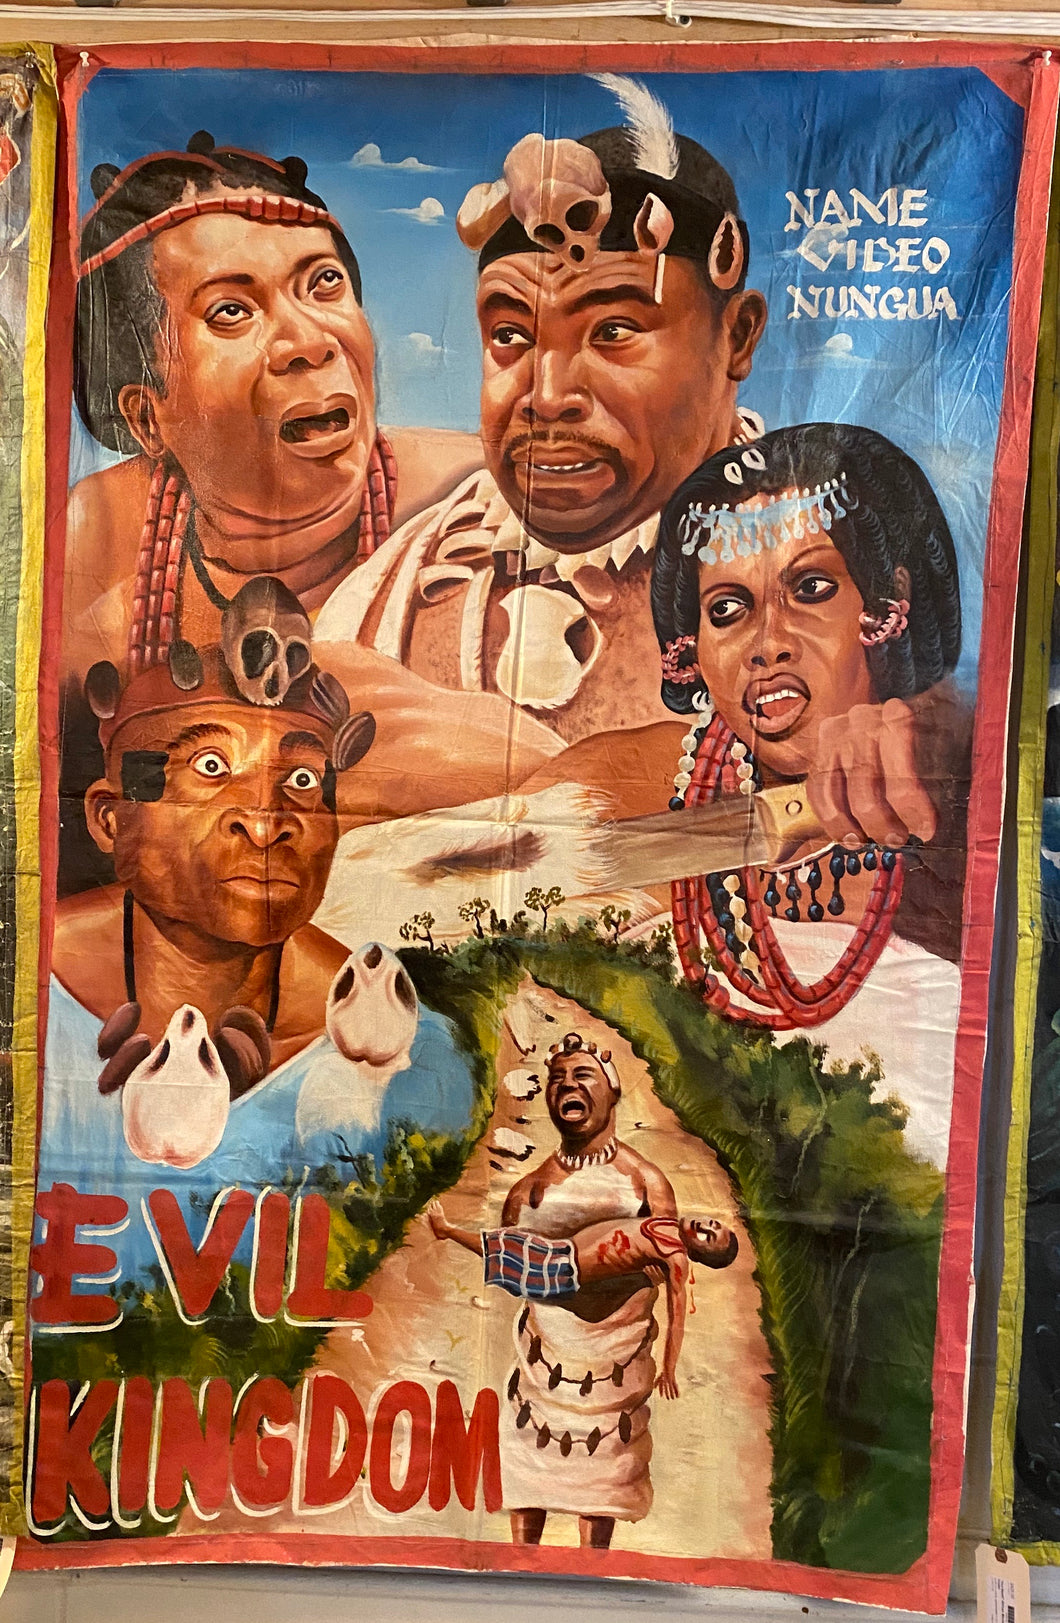 “Evil Kingdom” Hand-Painted African Movie Poster